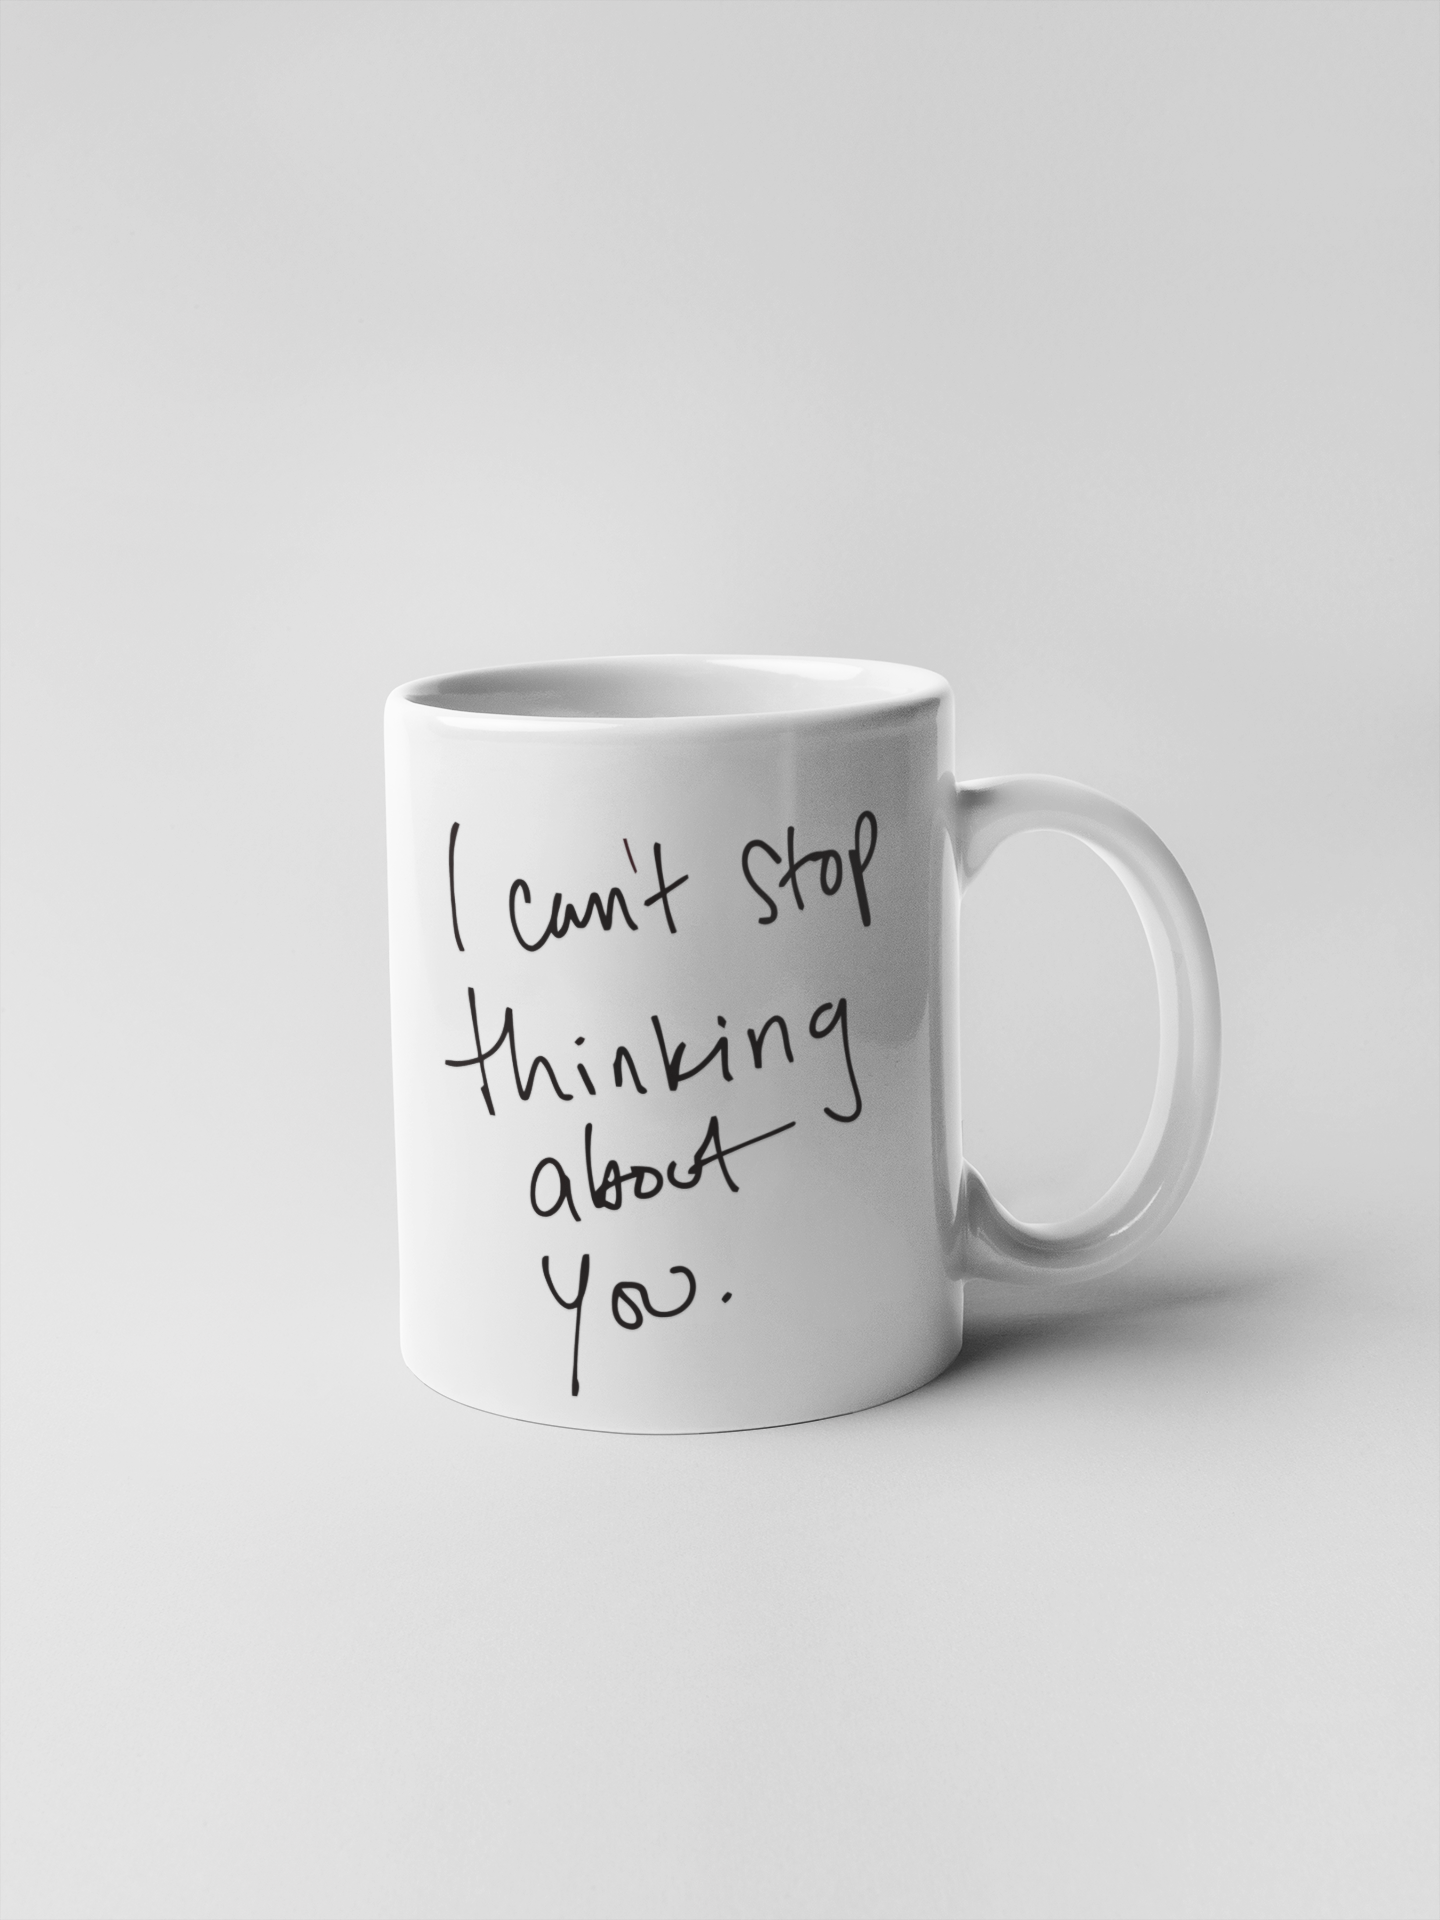 I Cant Stop Thinking about You Ceramic Coffee Mugs